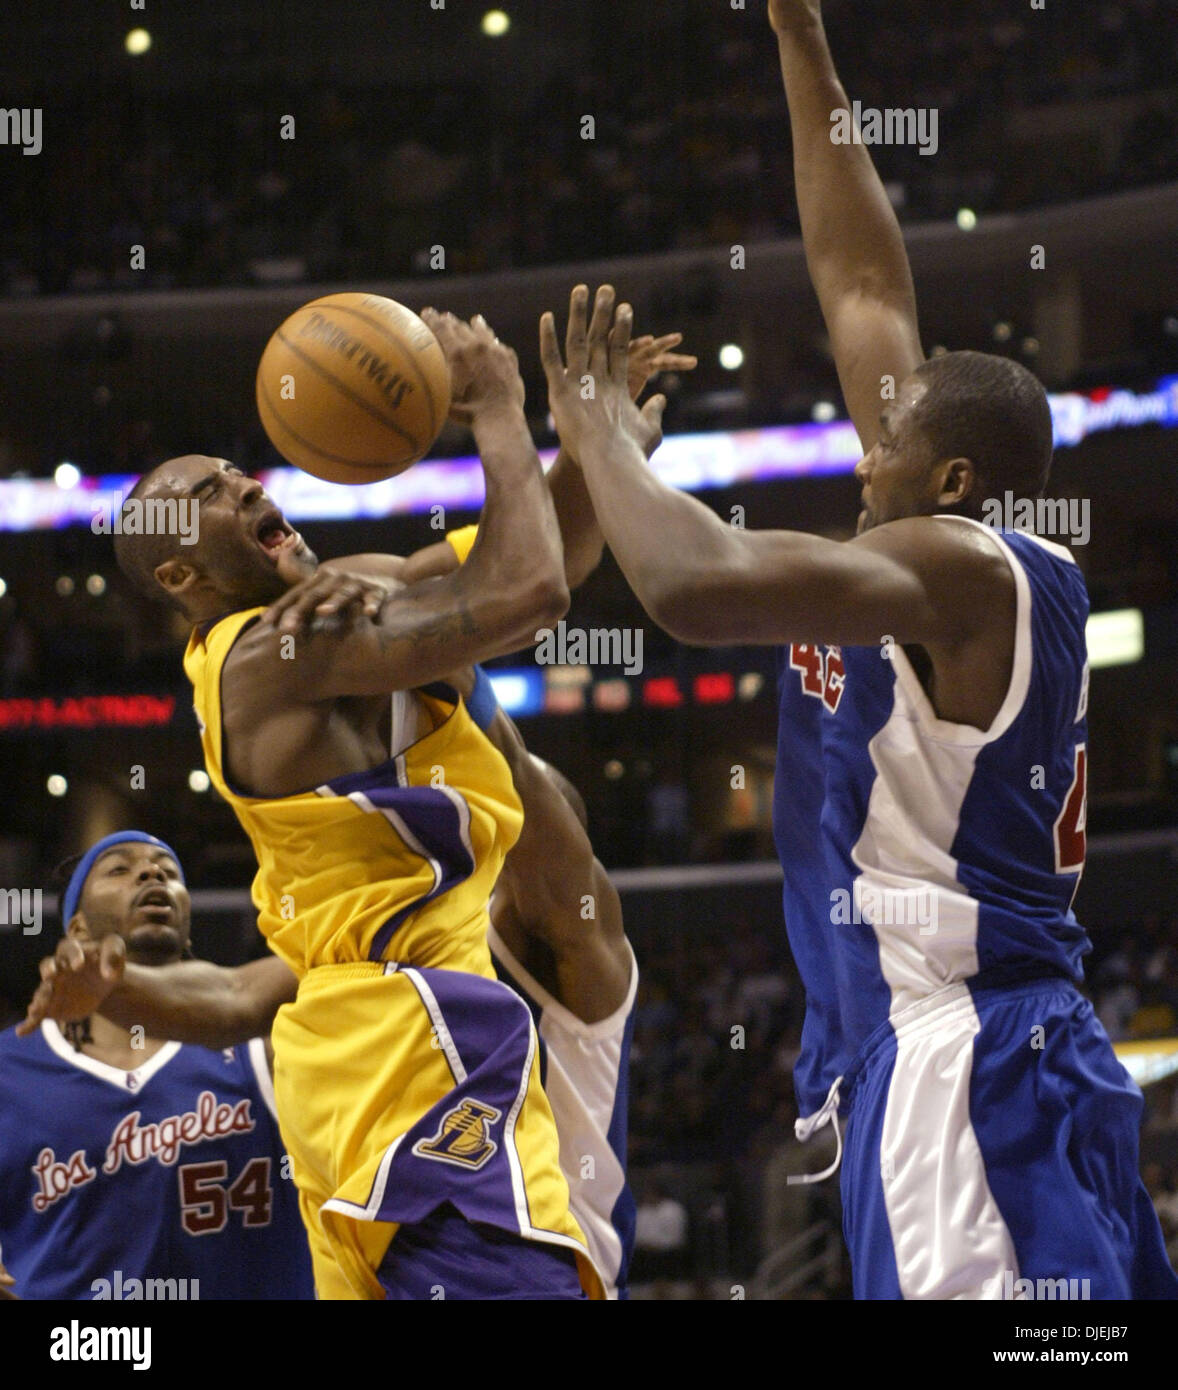 Gallery, Clippers vs Los Angeles Lakers (11.09.22) Photo Gallery